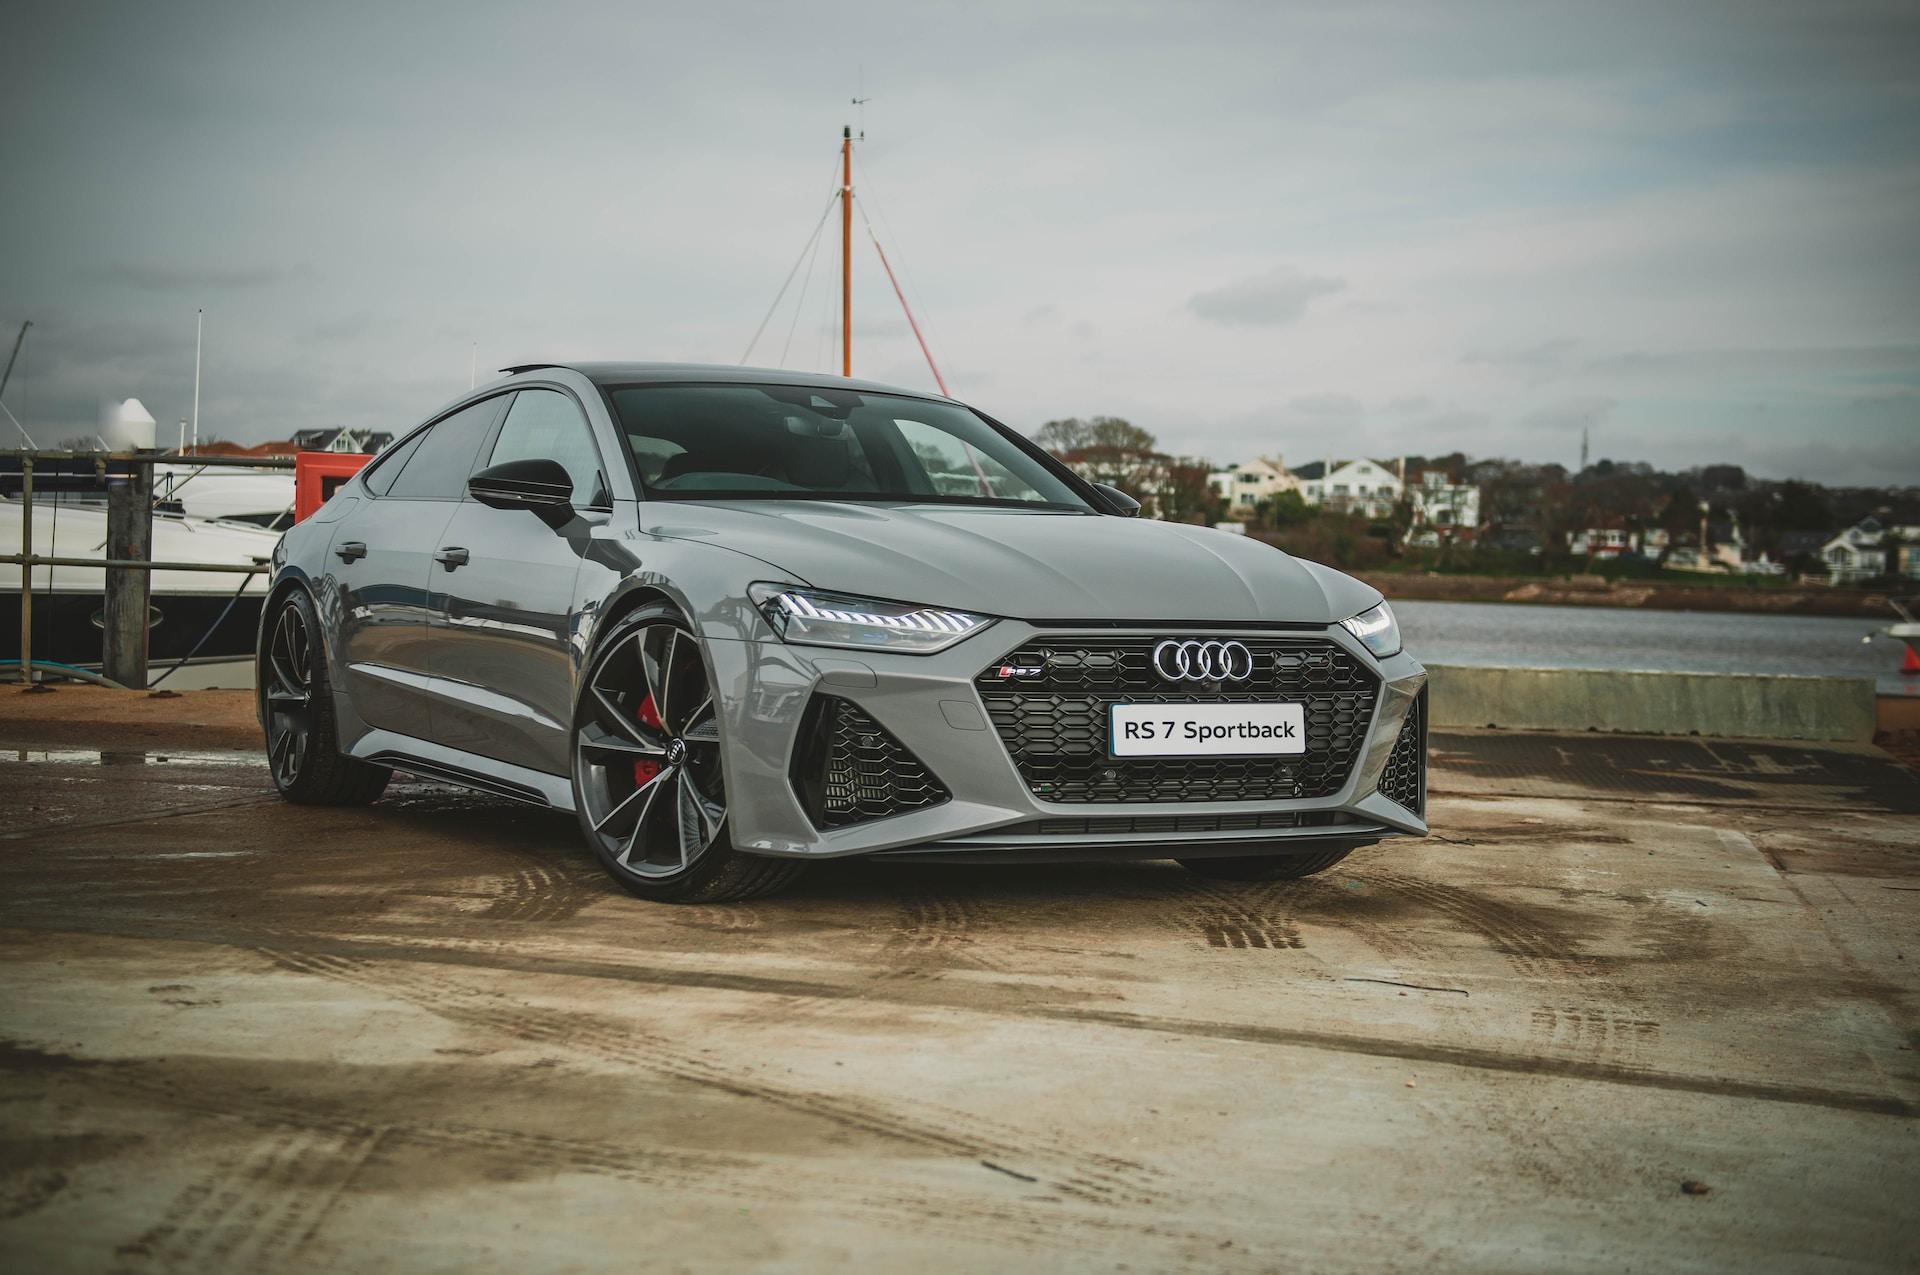 Audi RS7: Power, Elegance, and Luxury in Motion